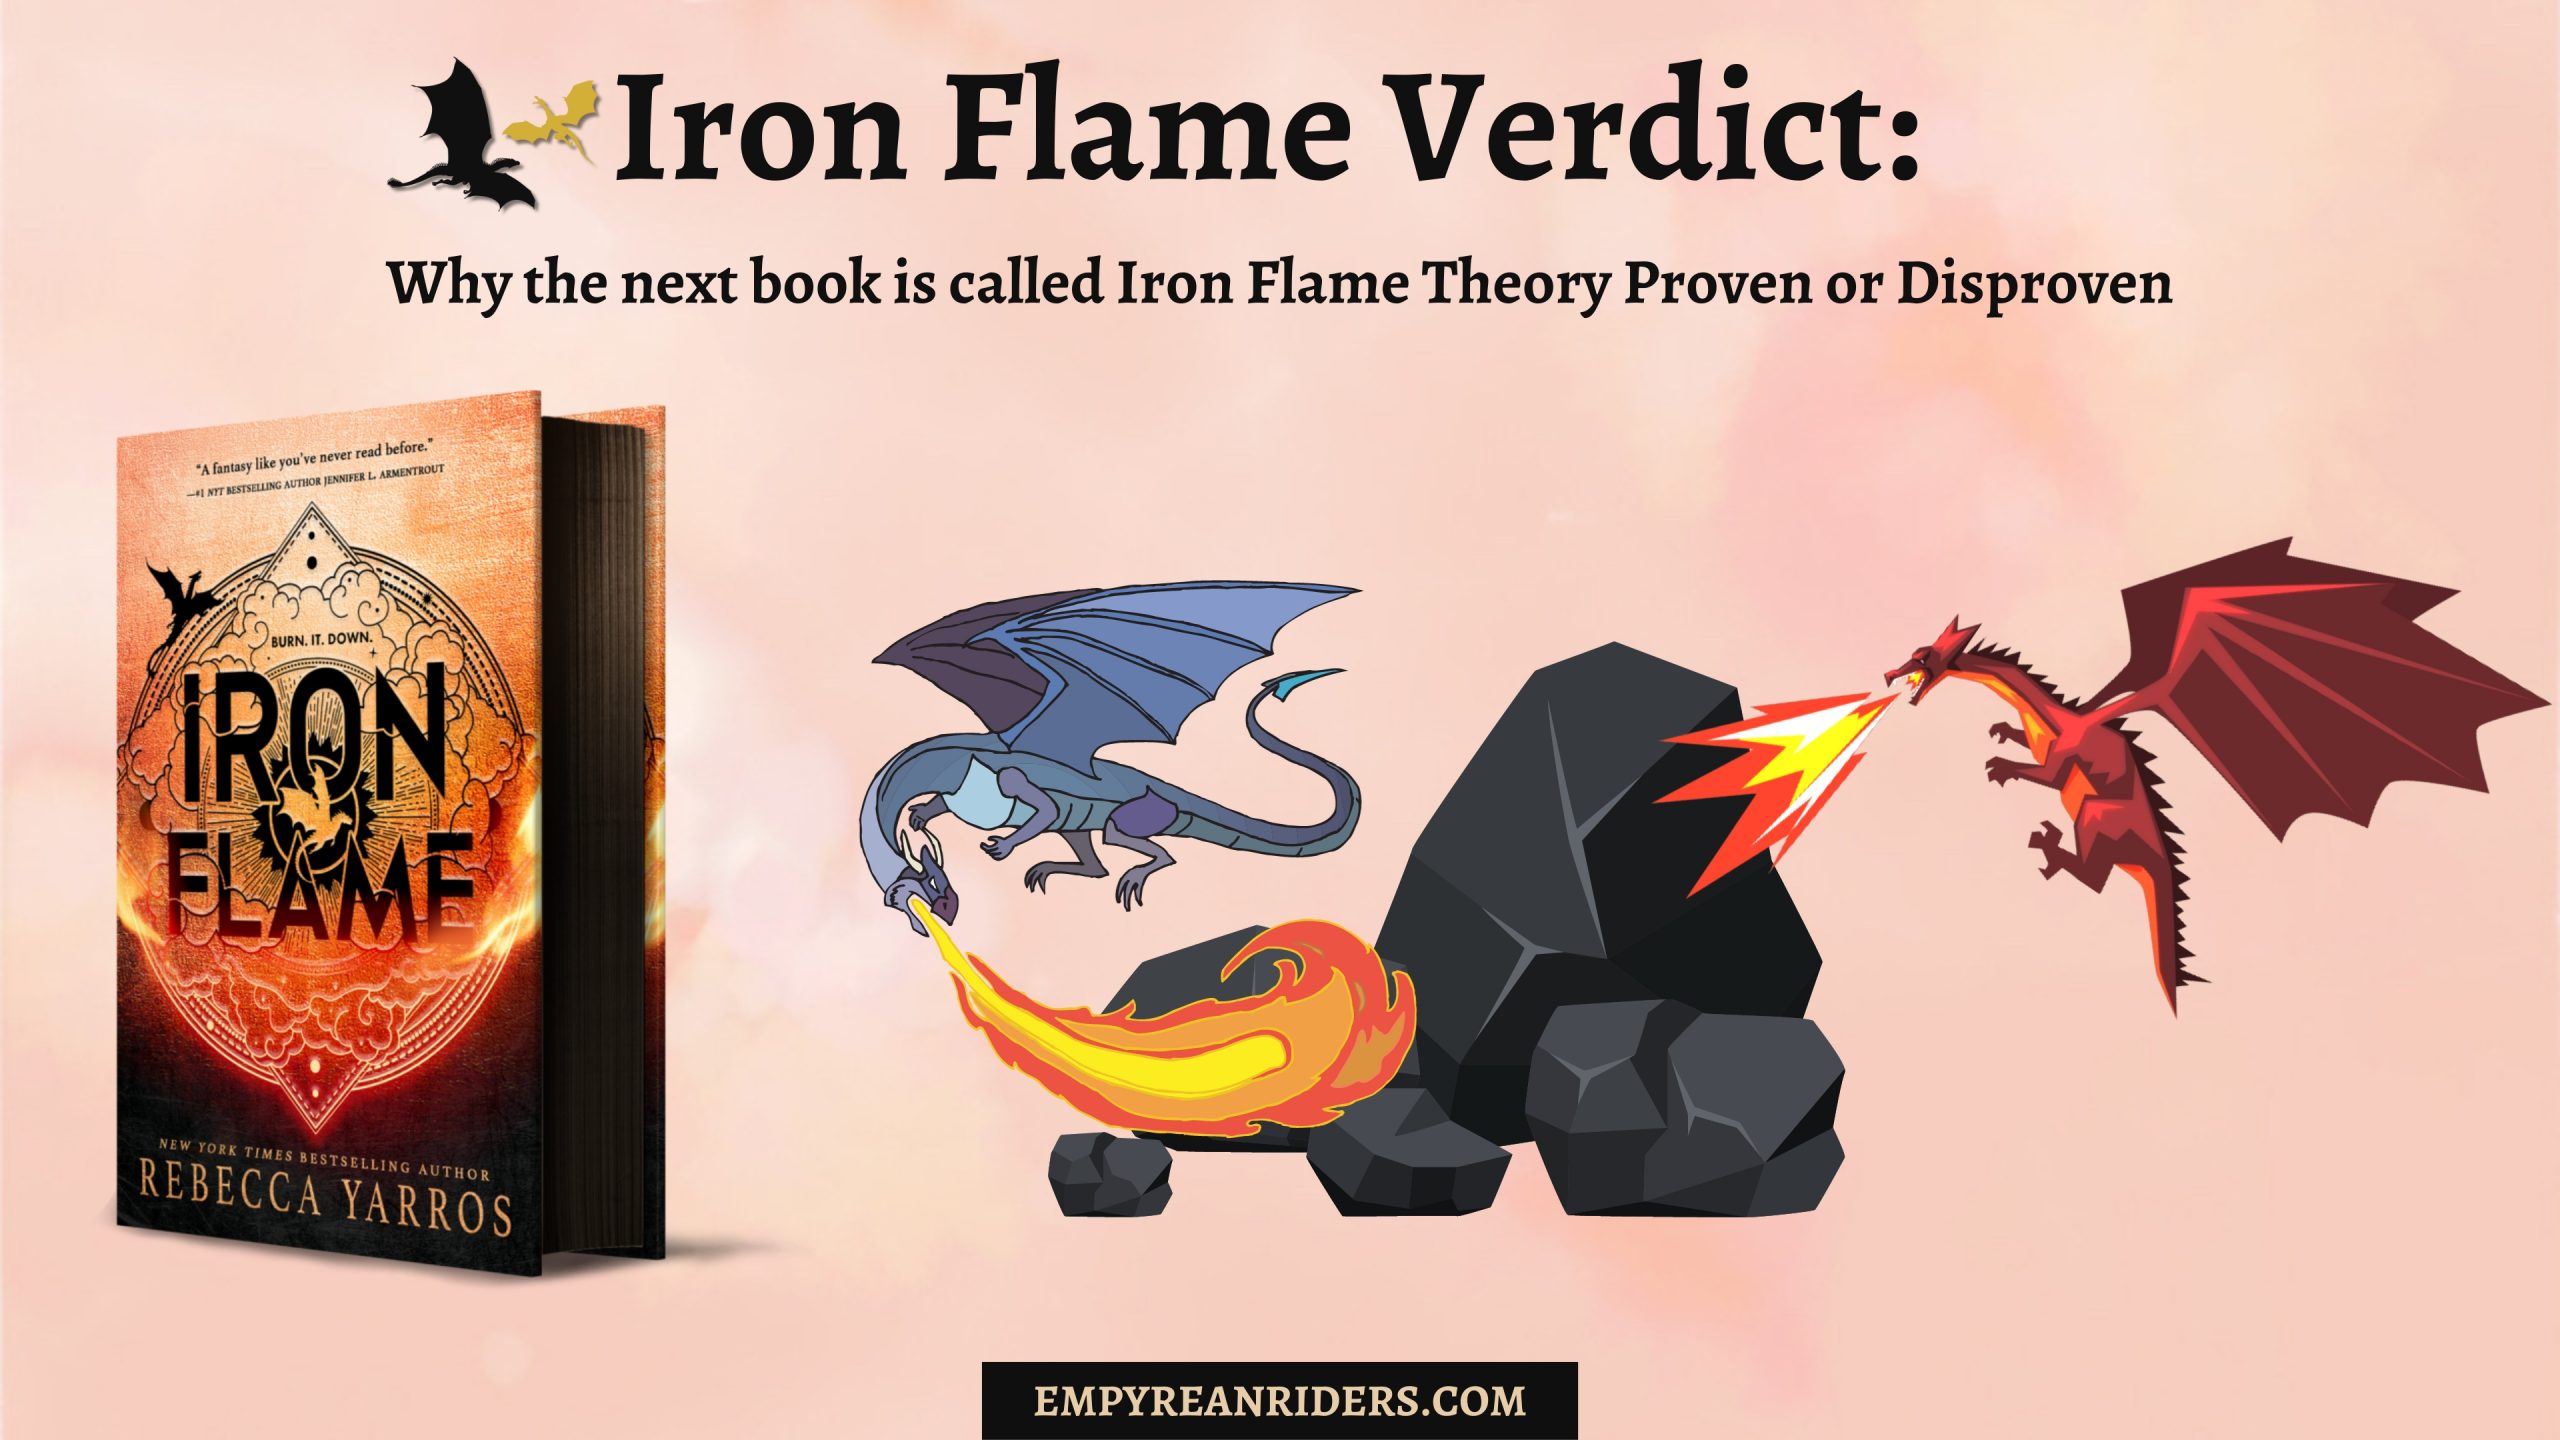 Iron Flame verdict - Why was the book called Iron Flame